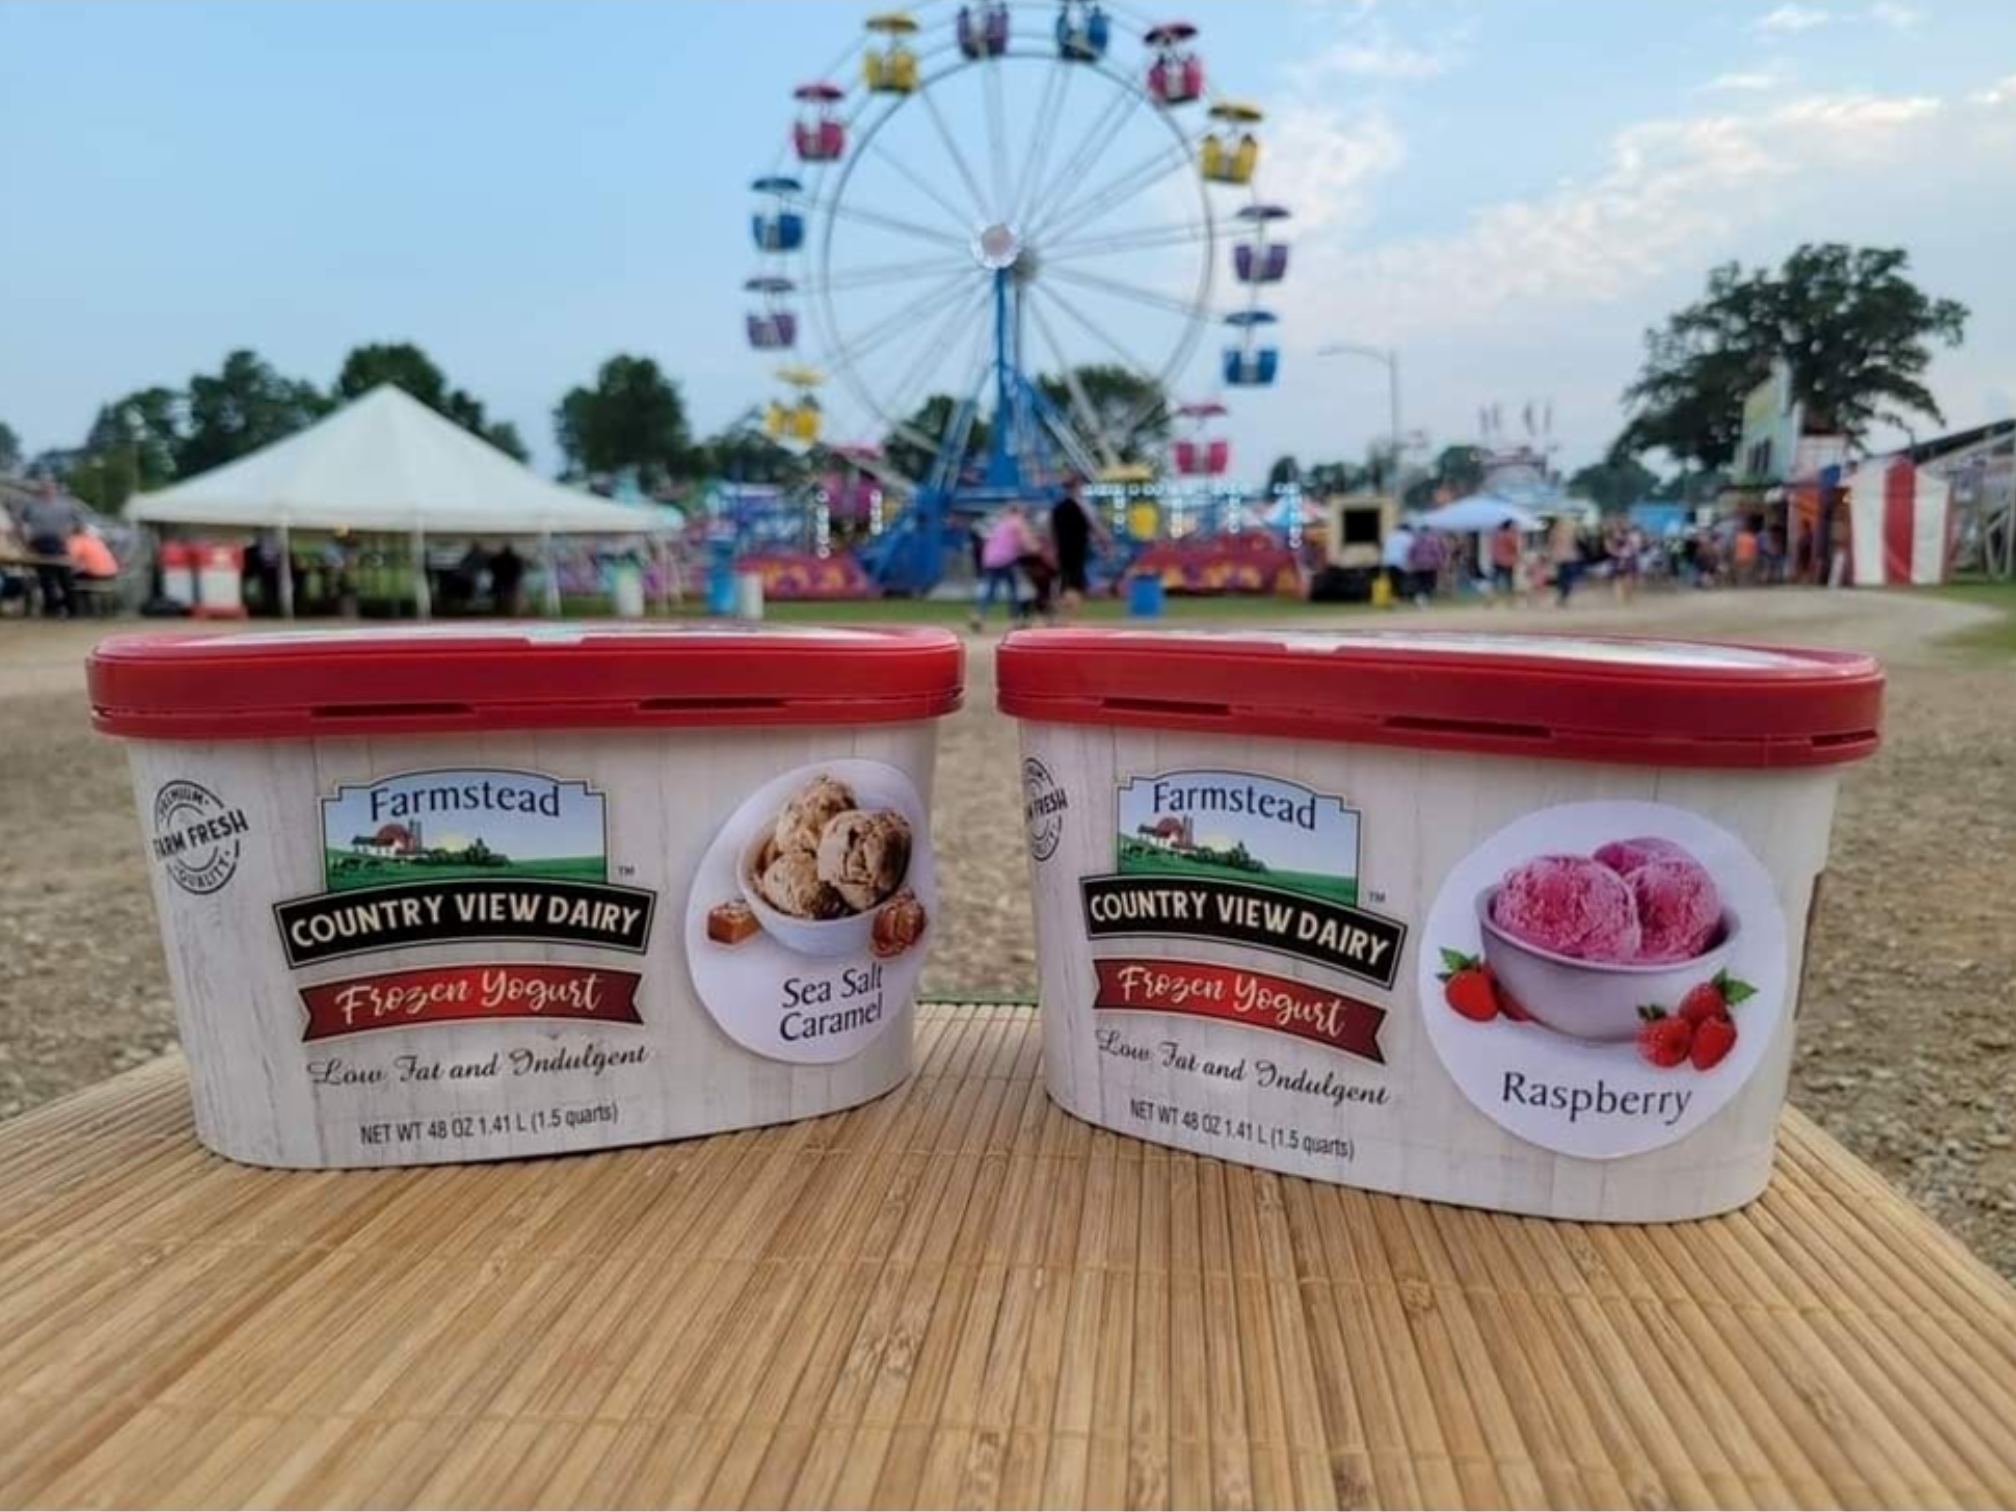 Two containers of ice cream sit displayed in front of a ferris wheel.